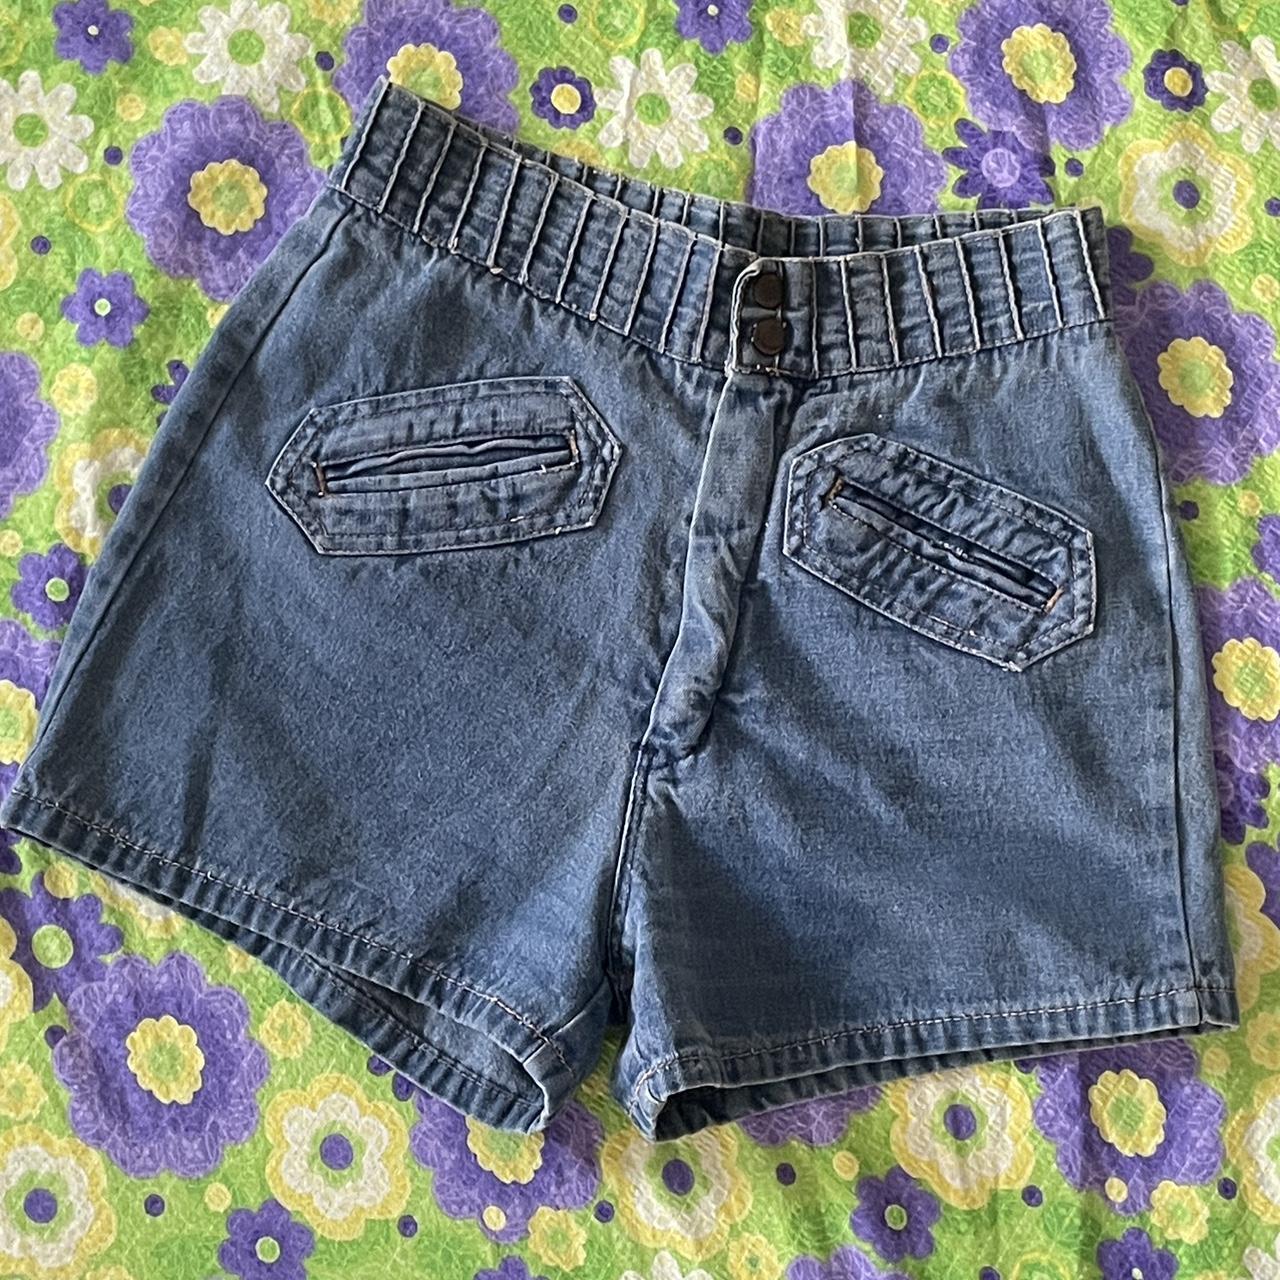 Vintage 70’s High Waisted Jean Shorts, Front and back...